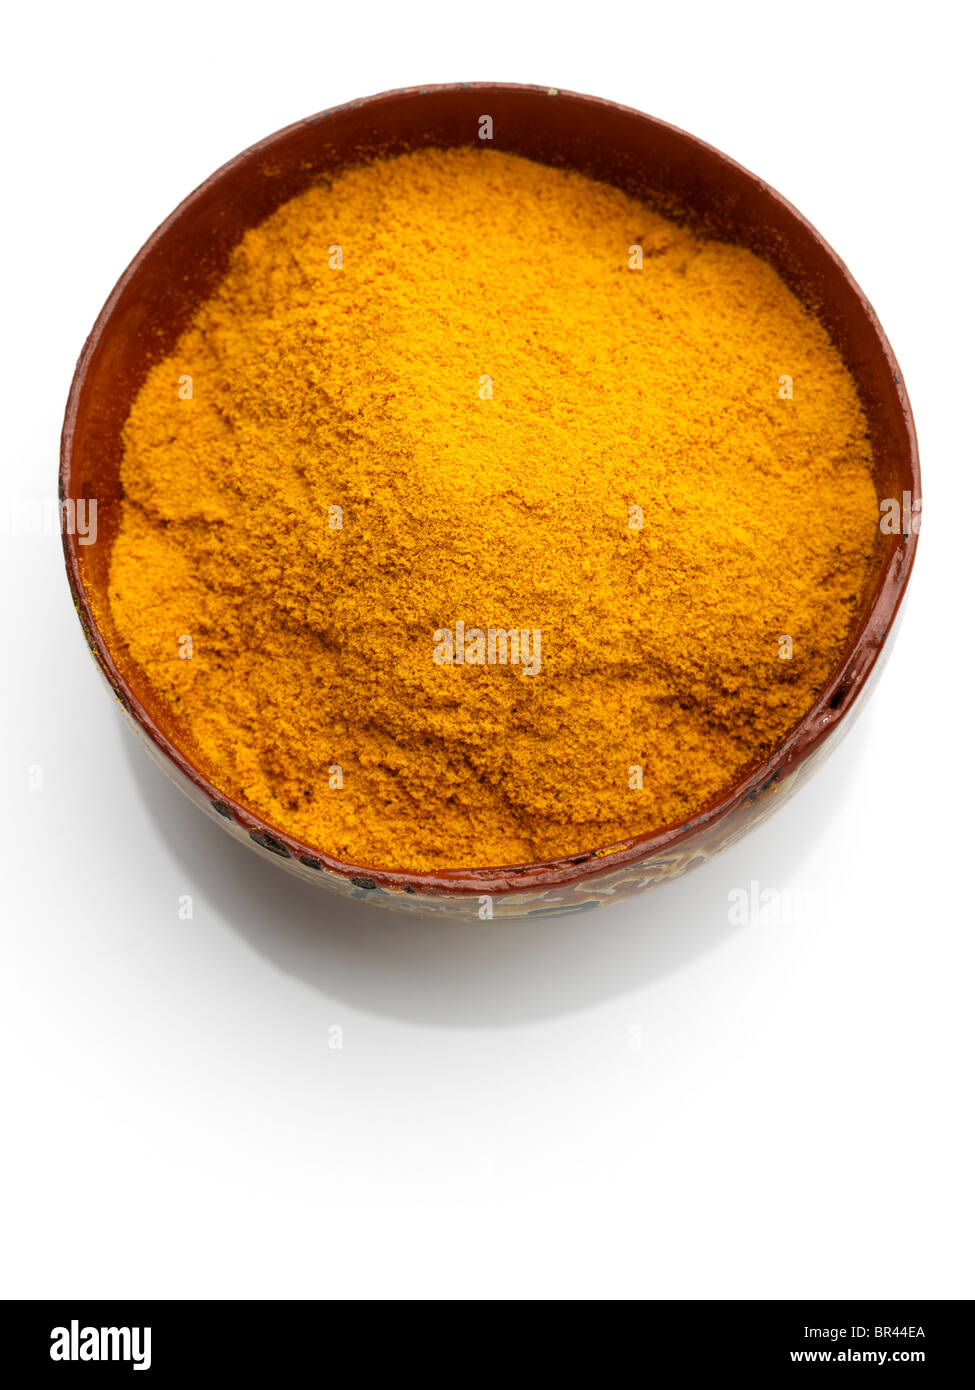 A bowl of turmeric on a white background Stock Photo